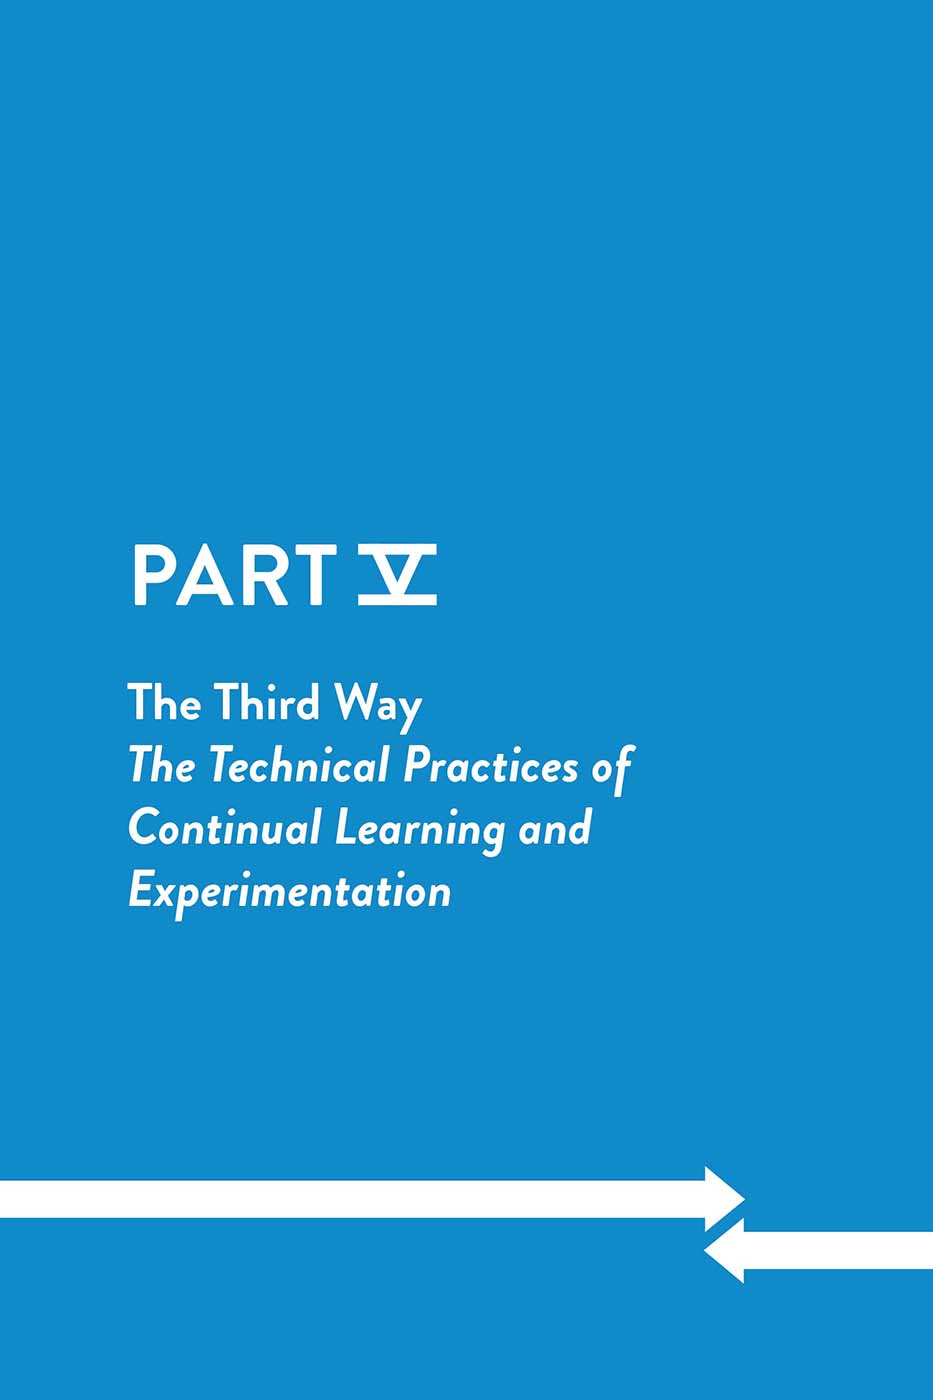 Part 5: The Third Way, The Technical Practices of Continual Learning and Experimentation